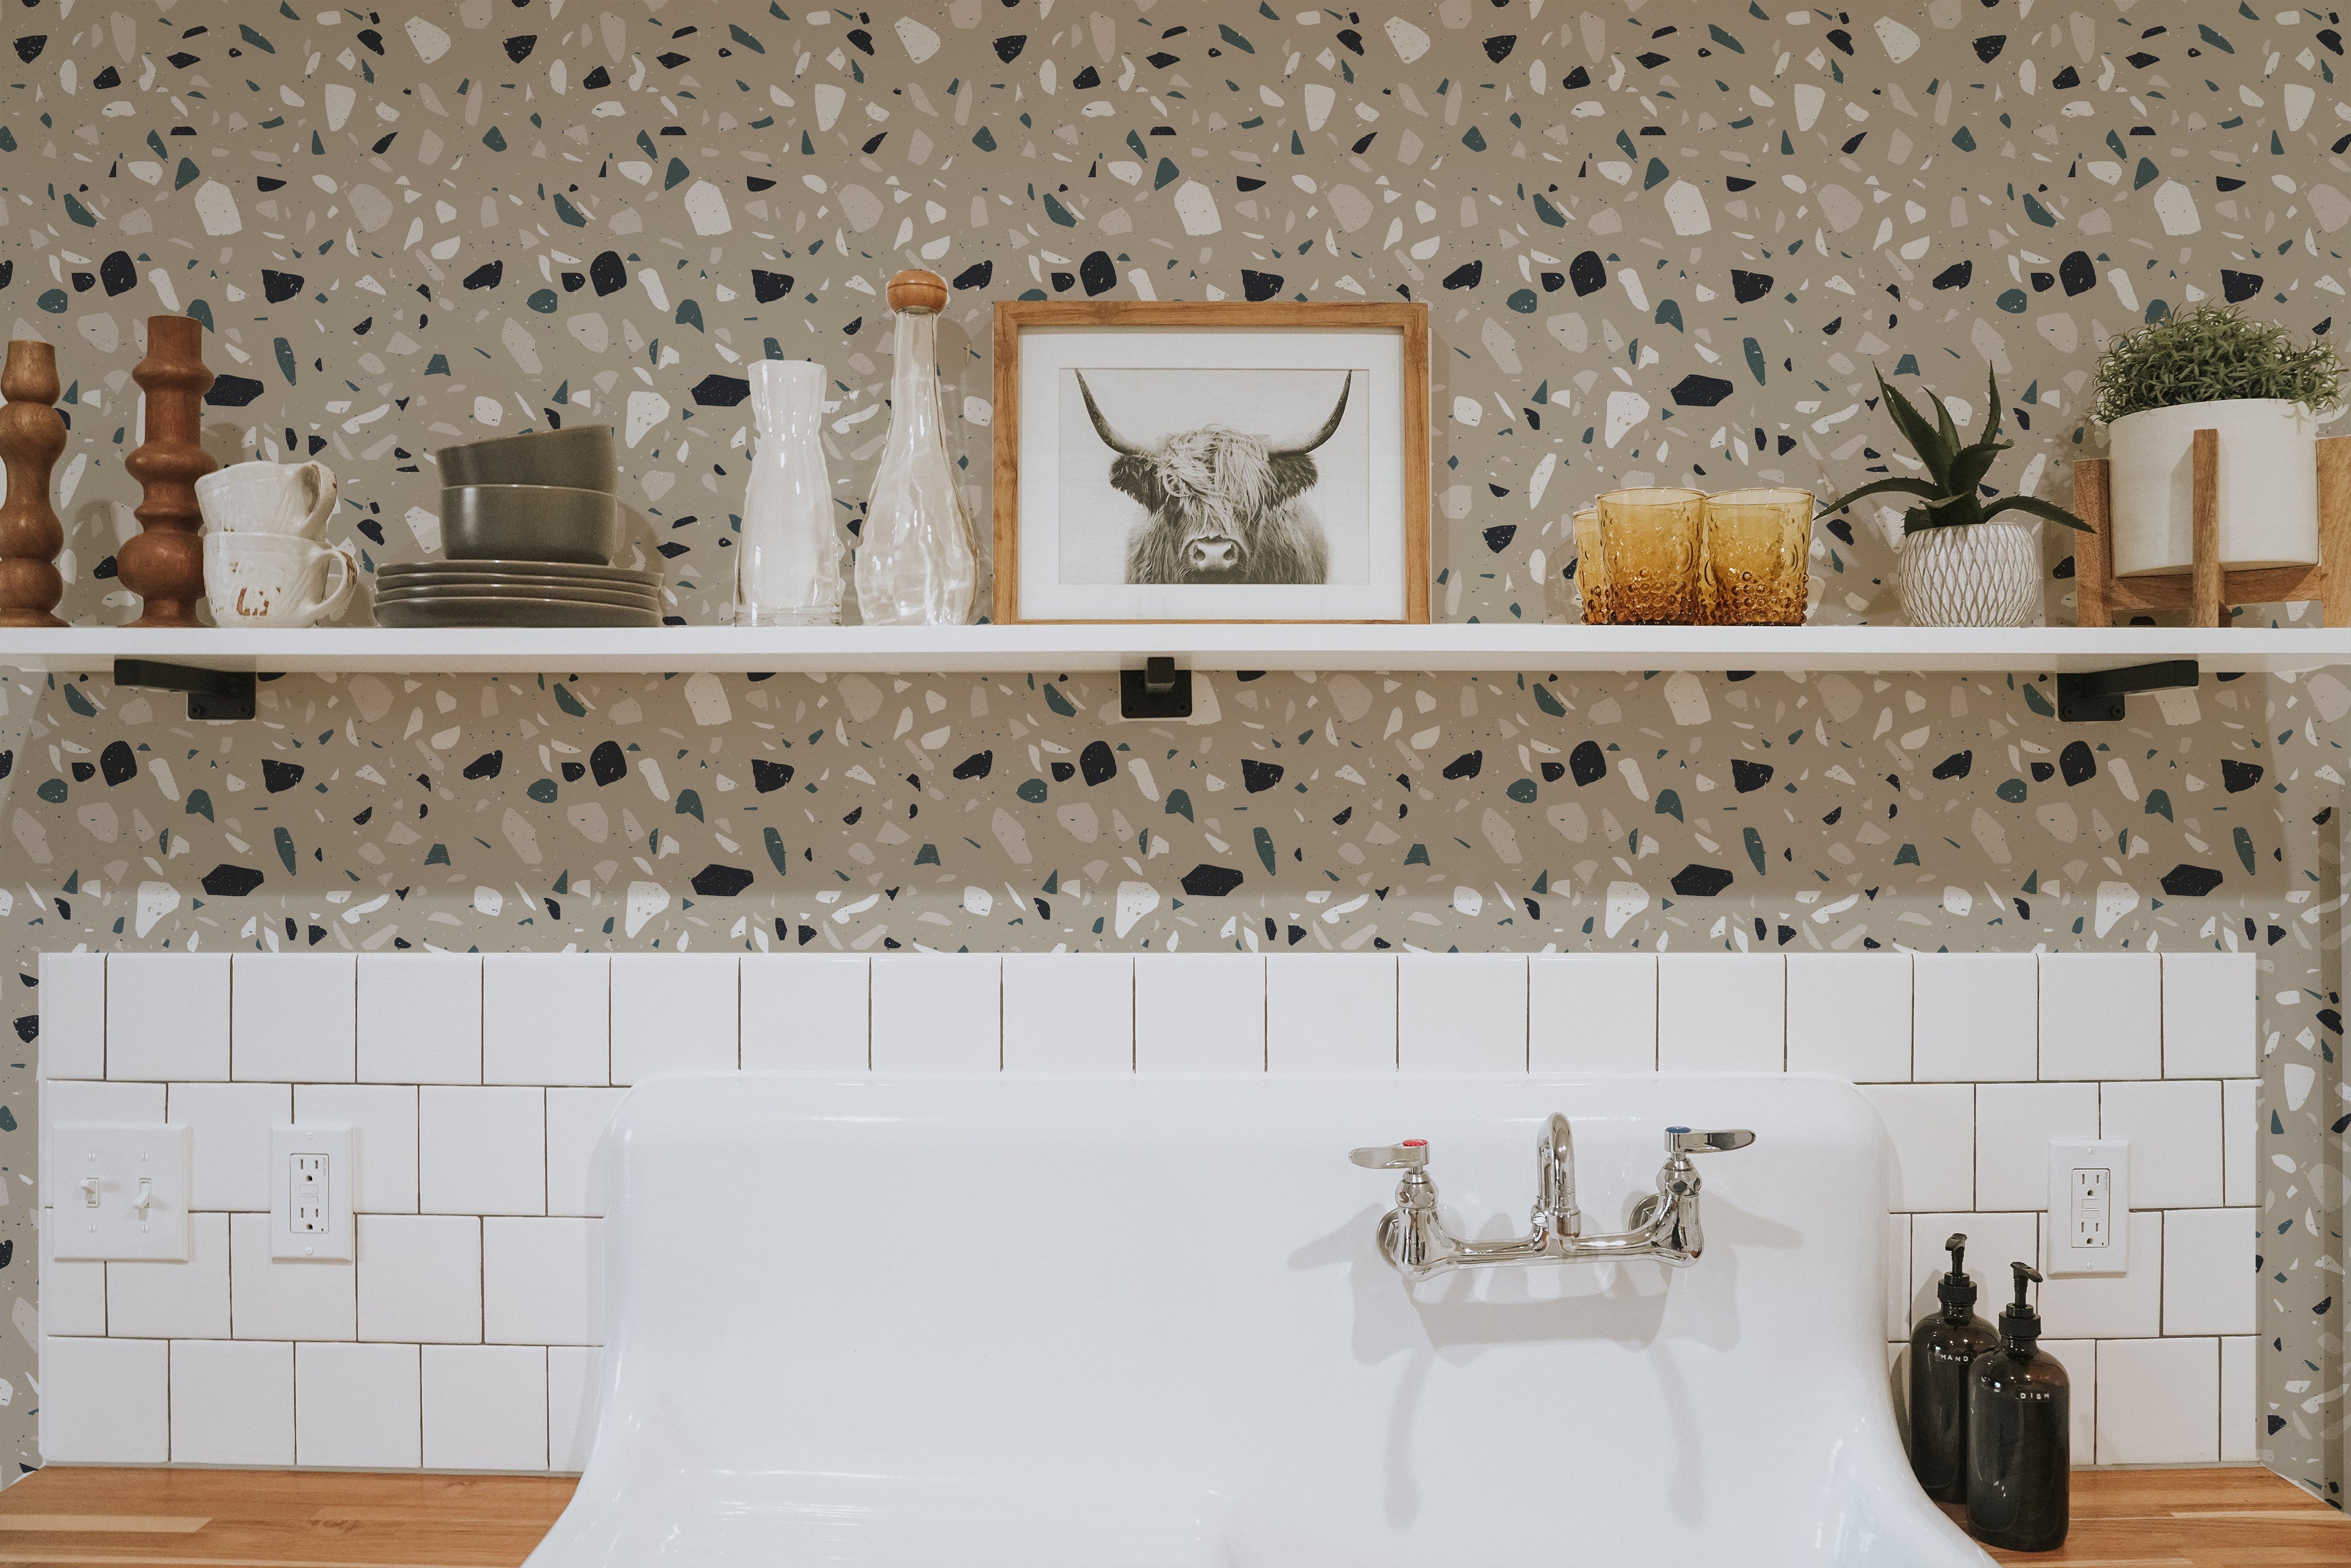 A bathroom setting featuring the Earthen Terrazzo Wallpaper as a backsplash, enhancing the space with its stylish terrazzo pattern of irregular shapes in muted tones. The design complements the white cabinetry and natural wood countertops, creating a modern yet earthy ambiance.